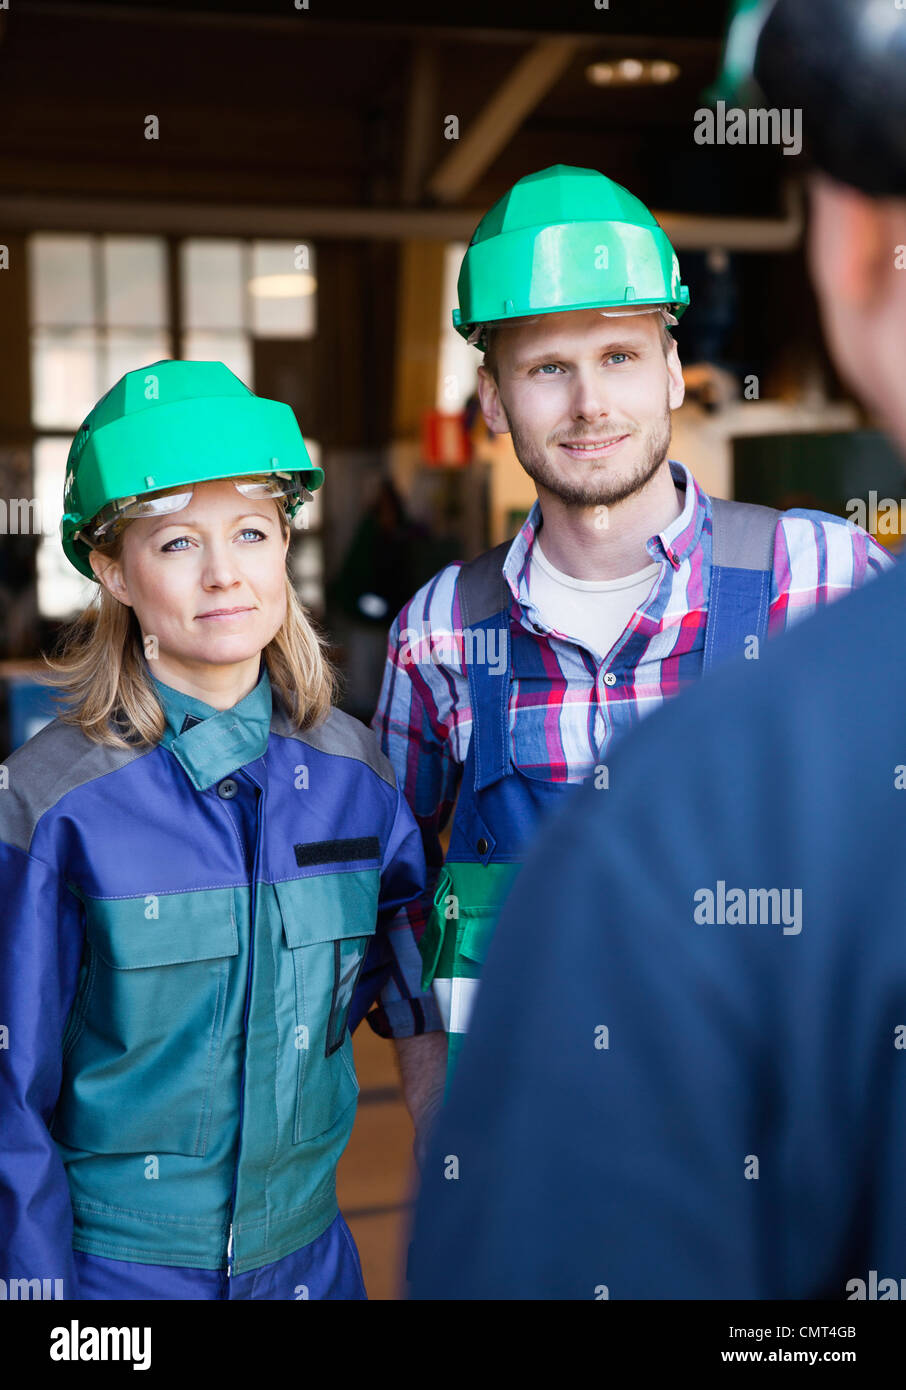 Colleagues in industrial environment Stock Photo